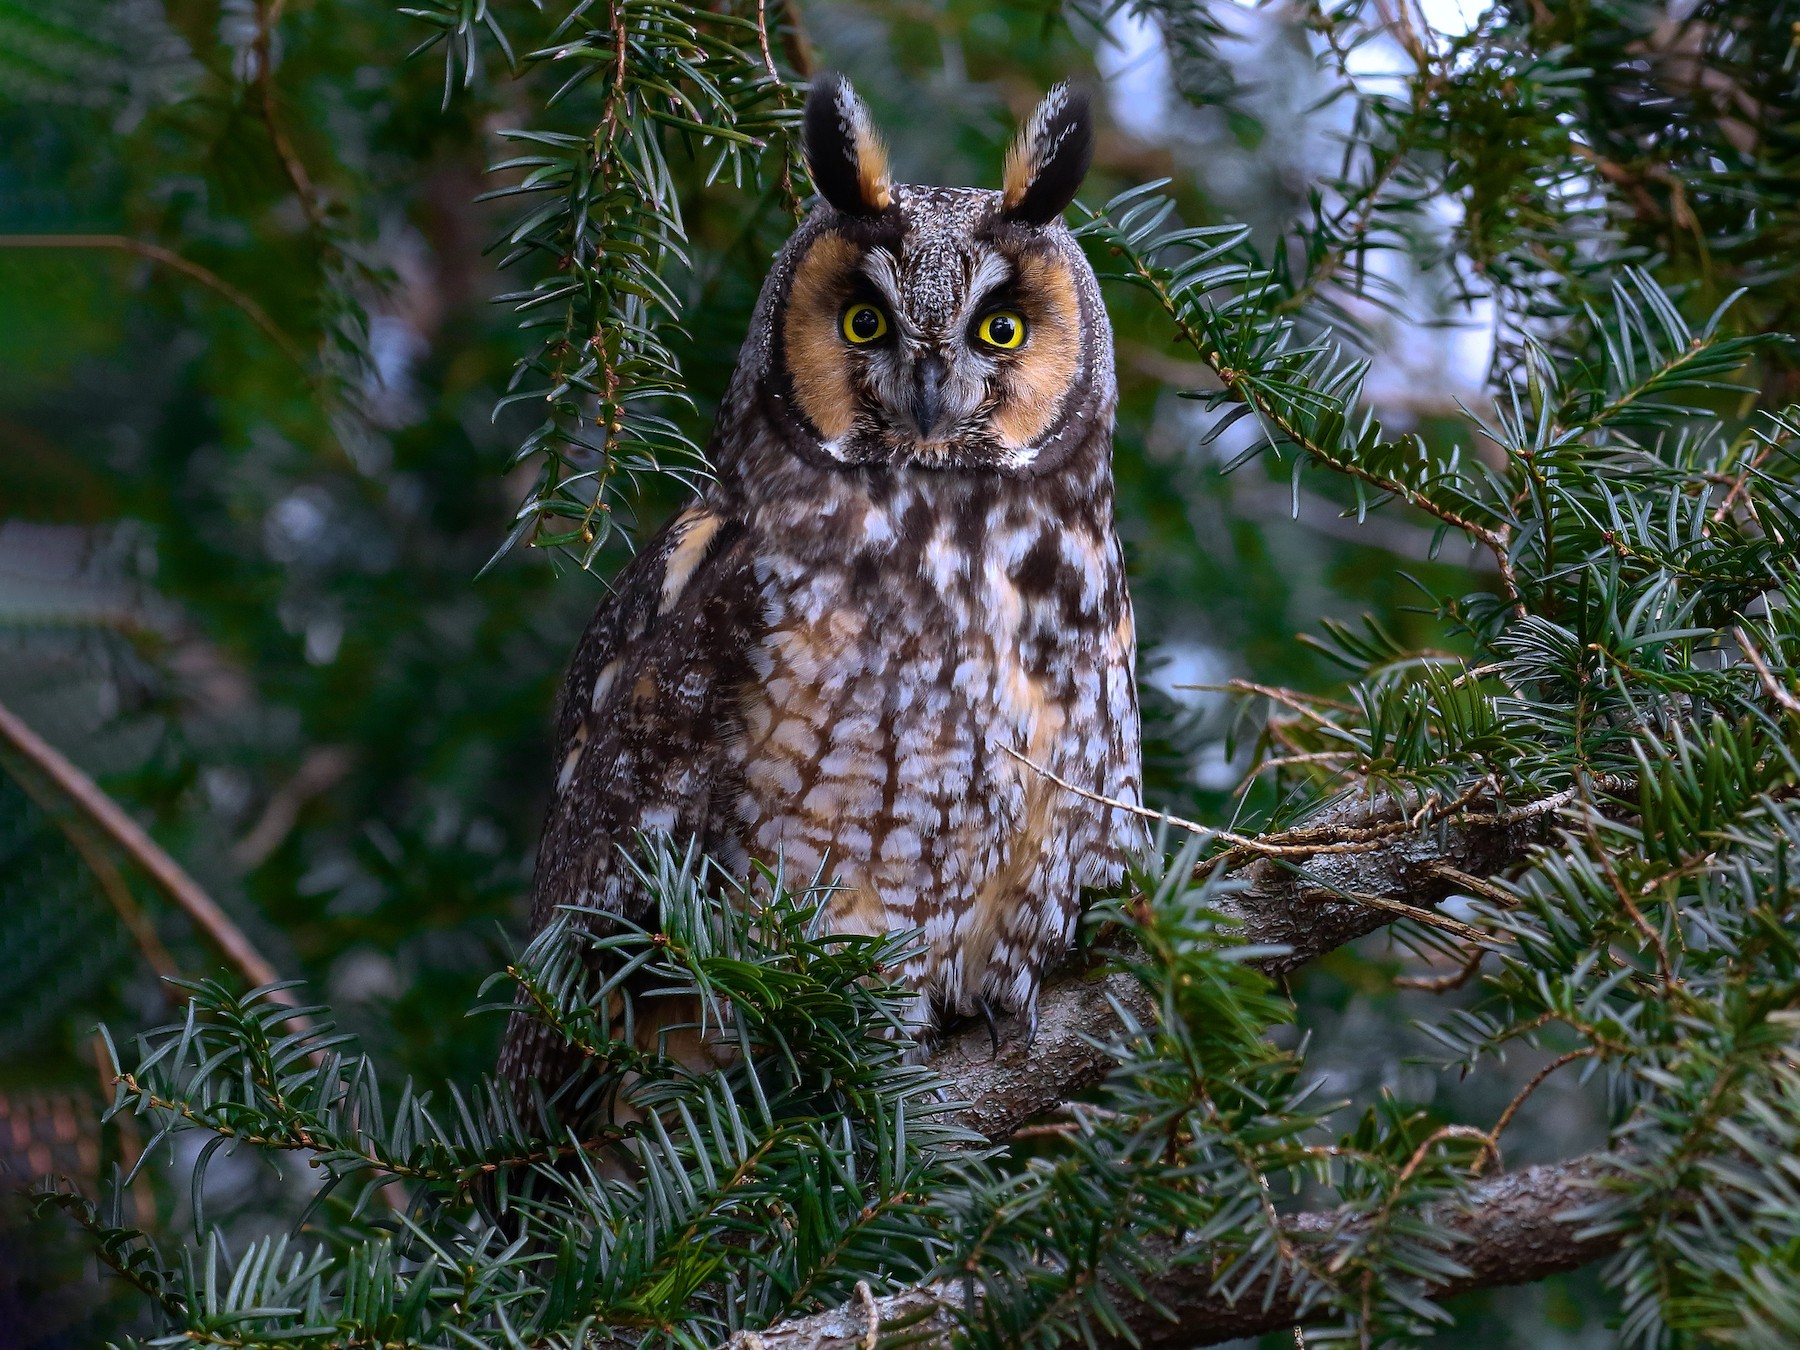 Two Long-eared owls resting looking at the camera sitting outdoors on a branch